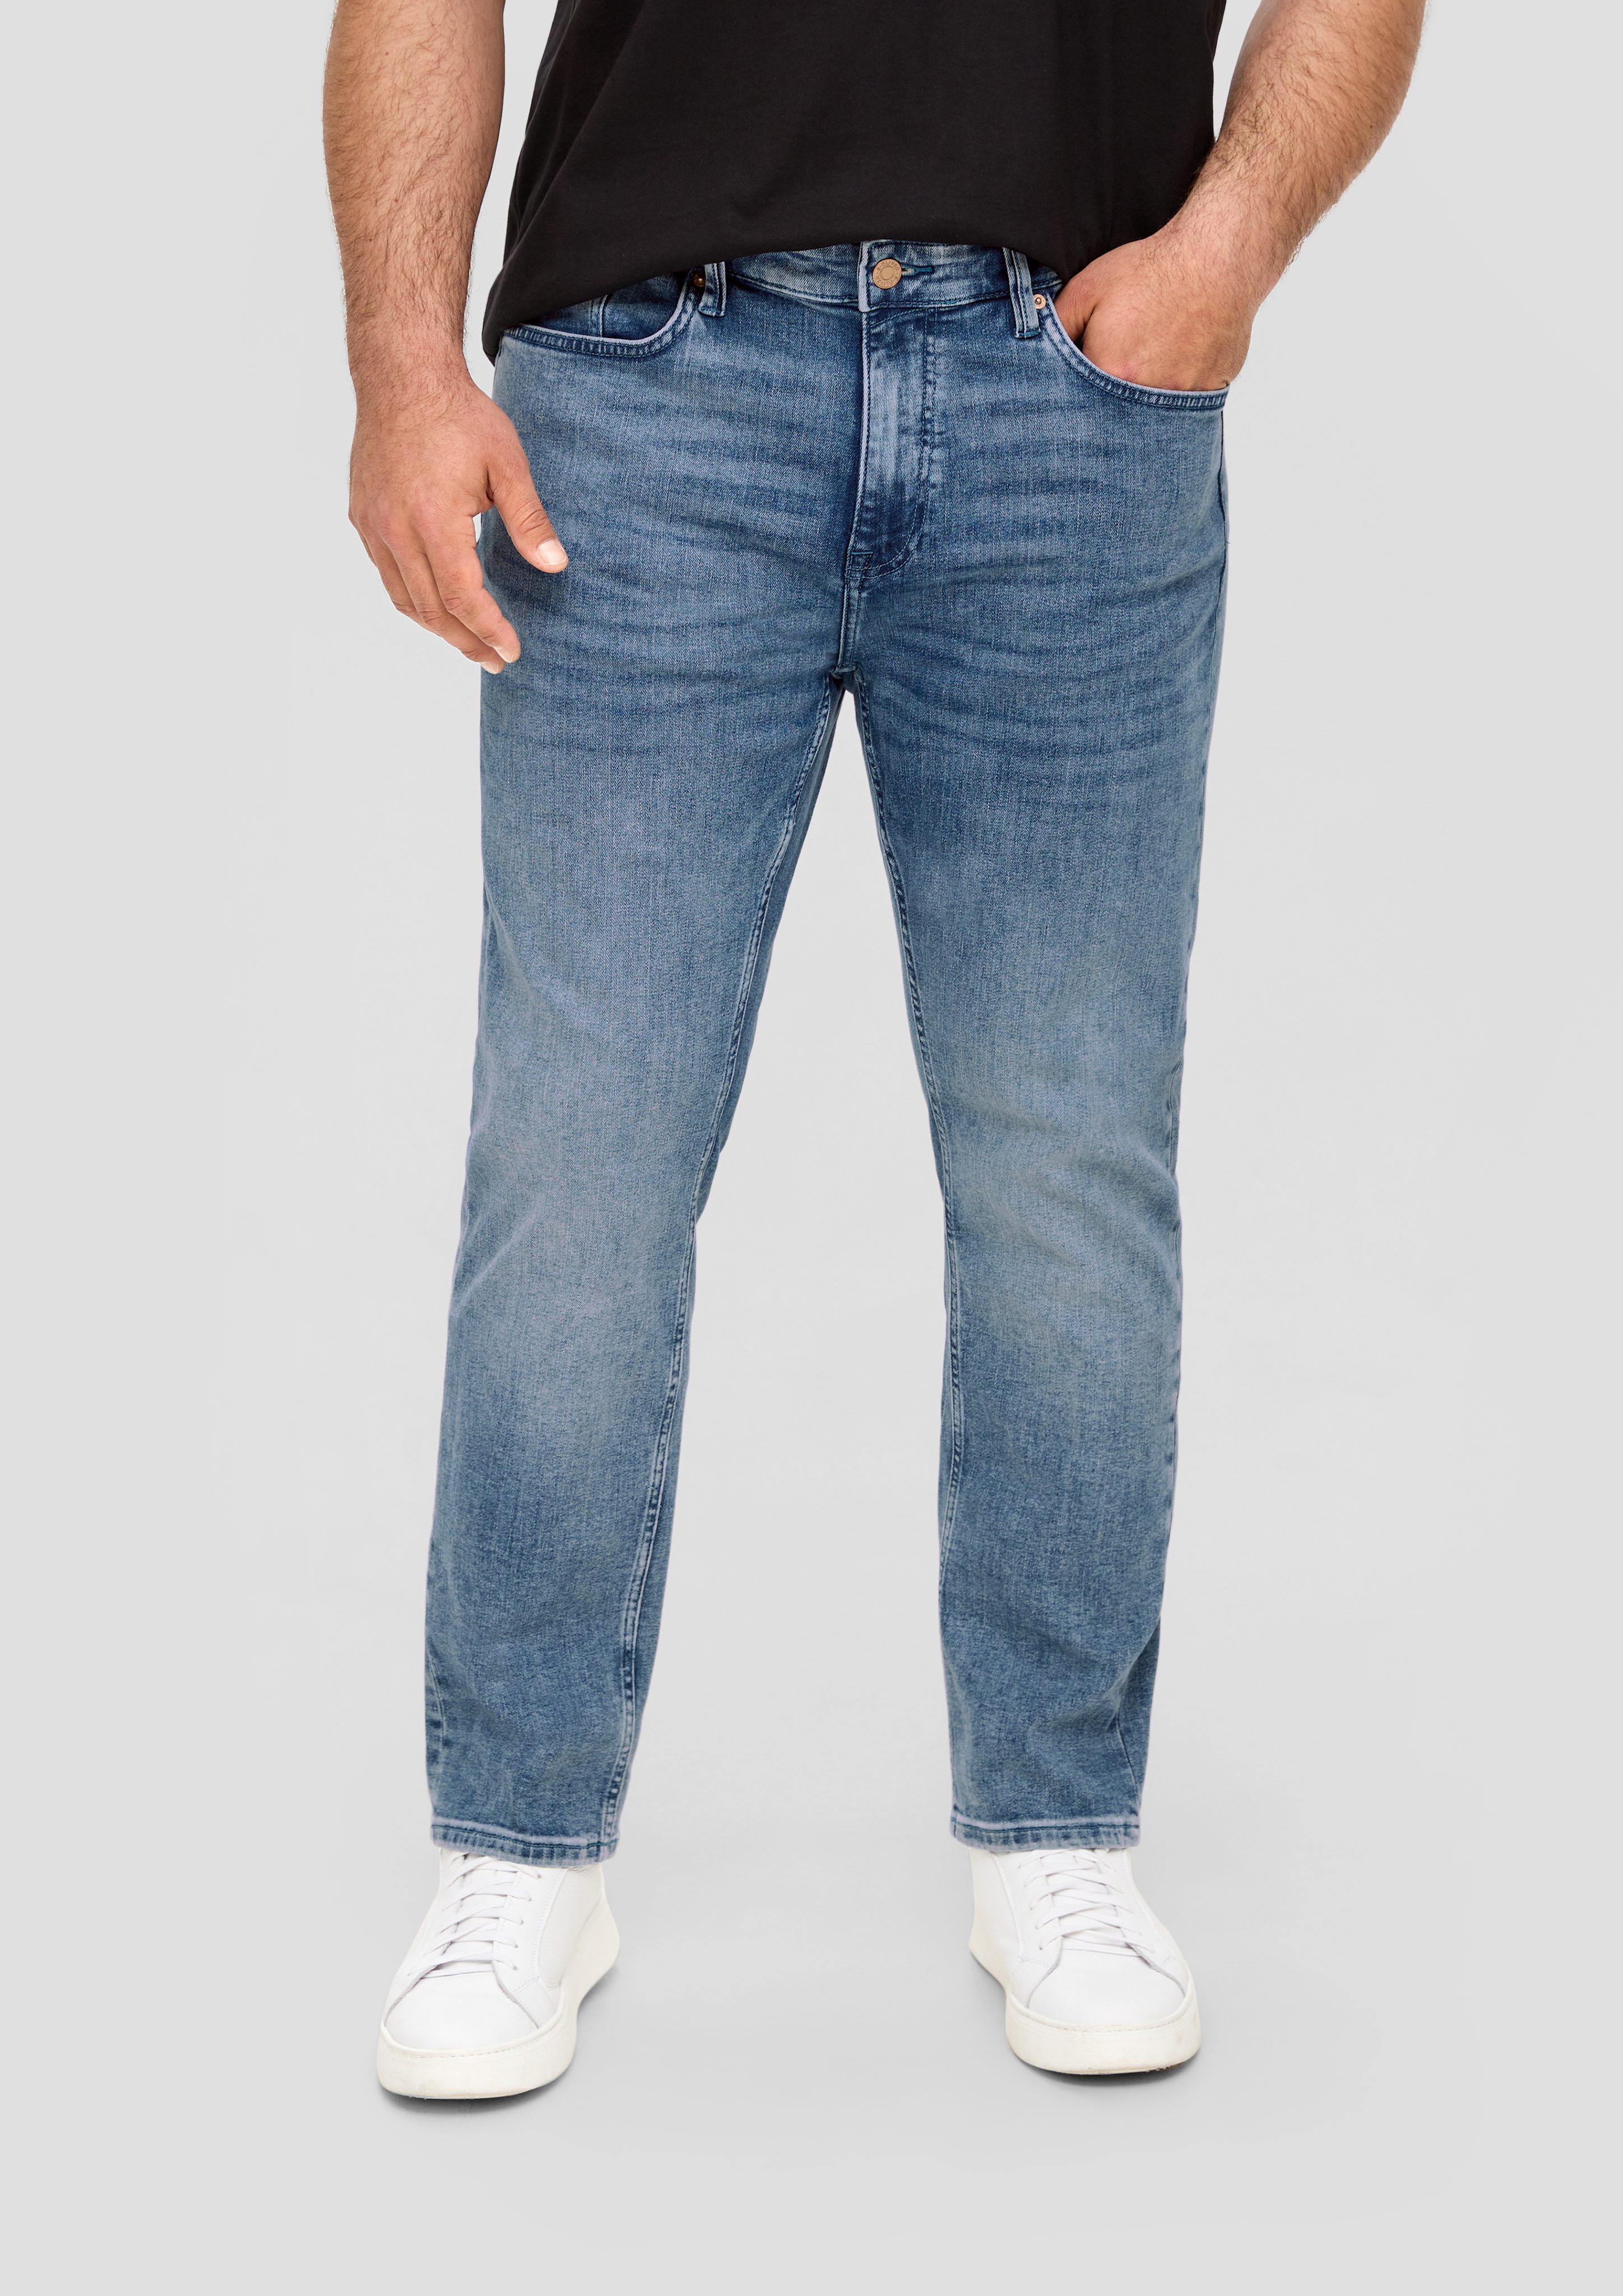 s.Oliver Stoffhose Jeans Casby / Relaxed Fit / Mid Rise / Straight Leg blau